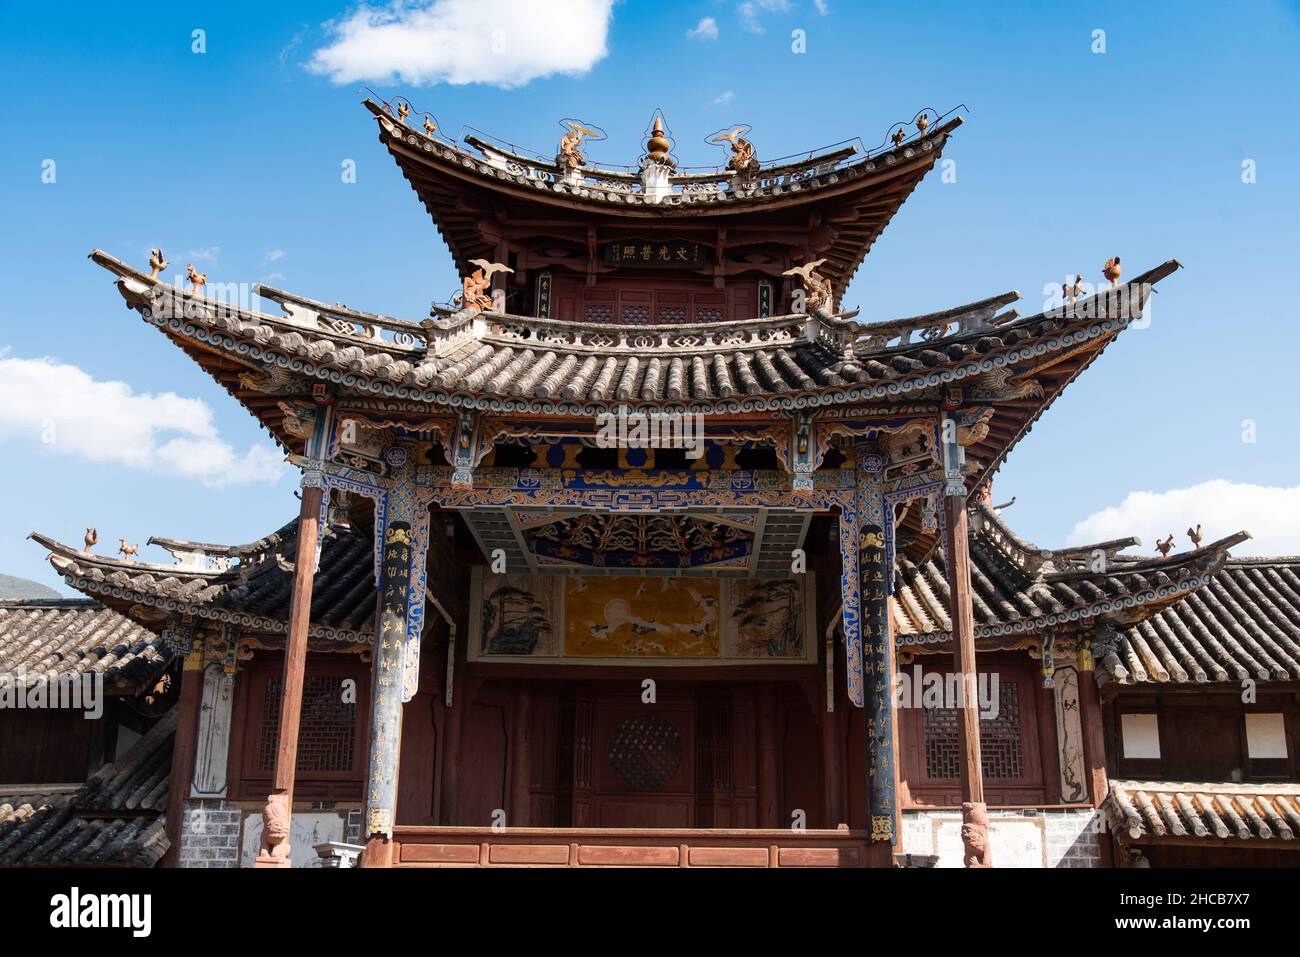 Shaxi. Halfway between Dali and Lijiang, a real ancient city with an ancient flavor and still retains the most original architectural features. Stock Photo